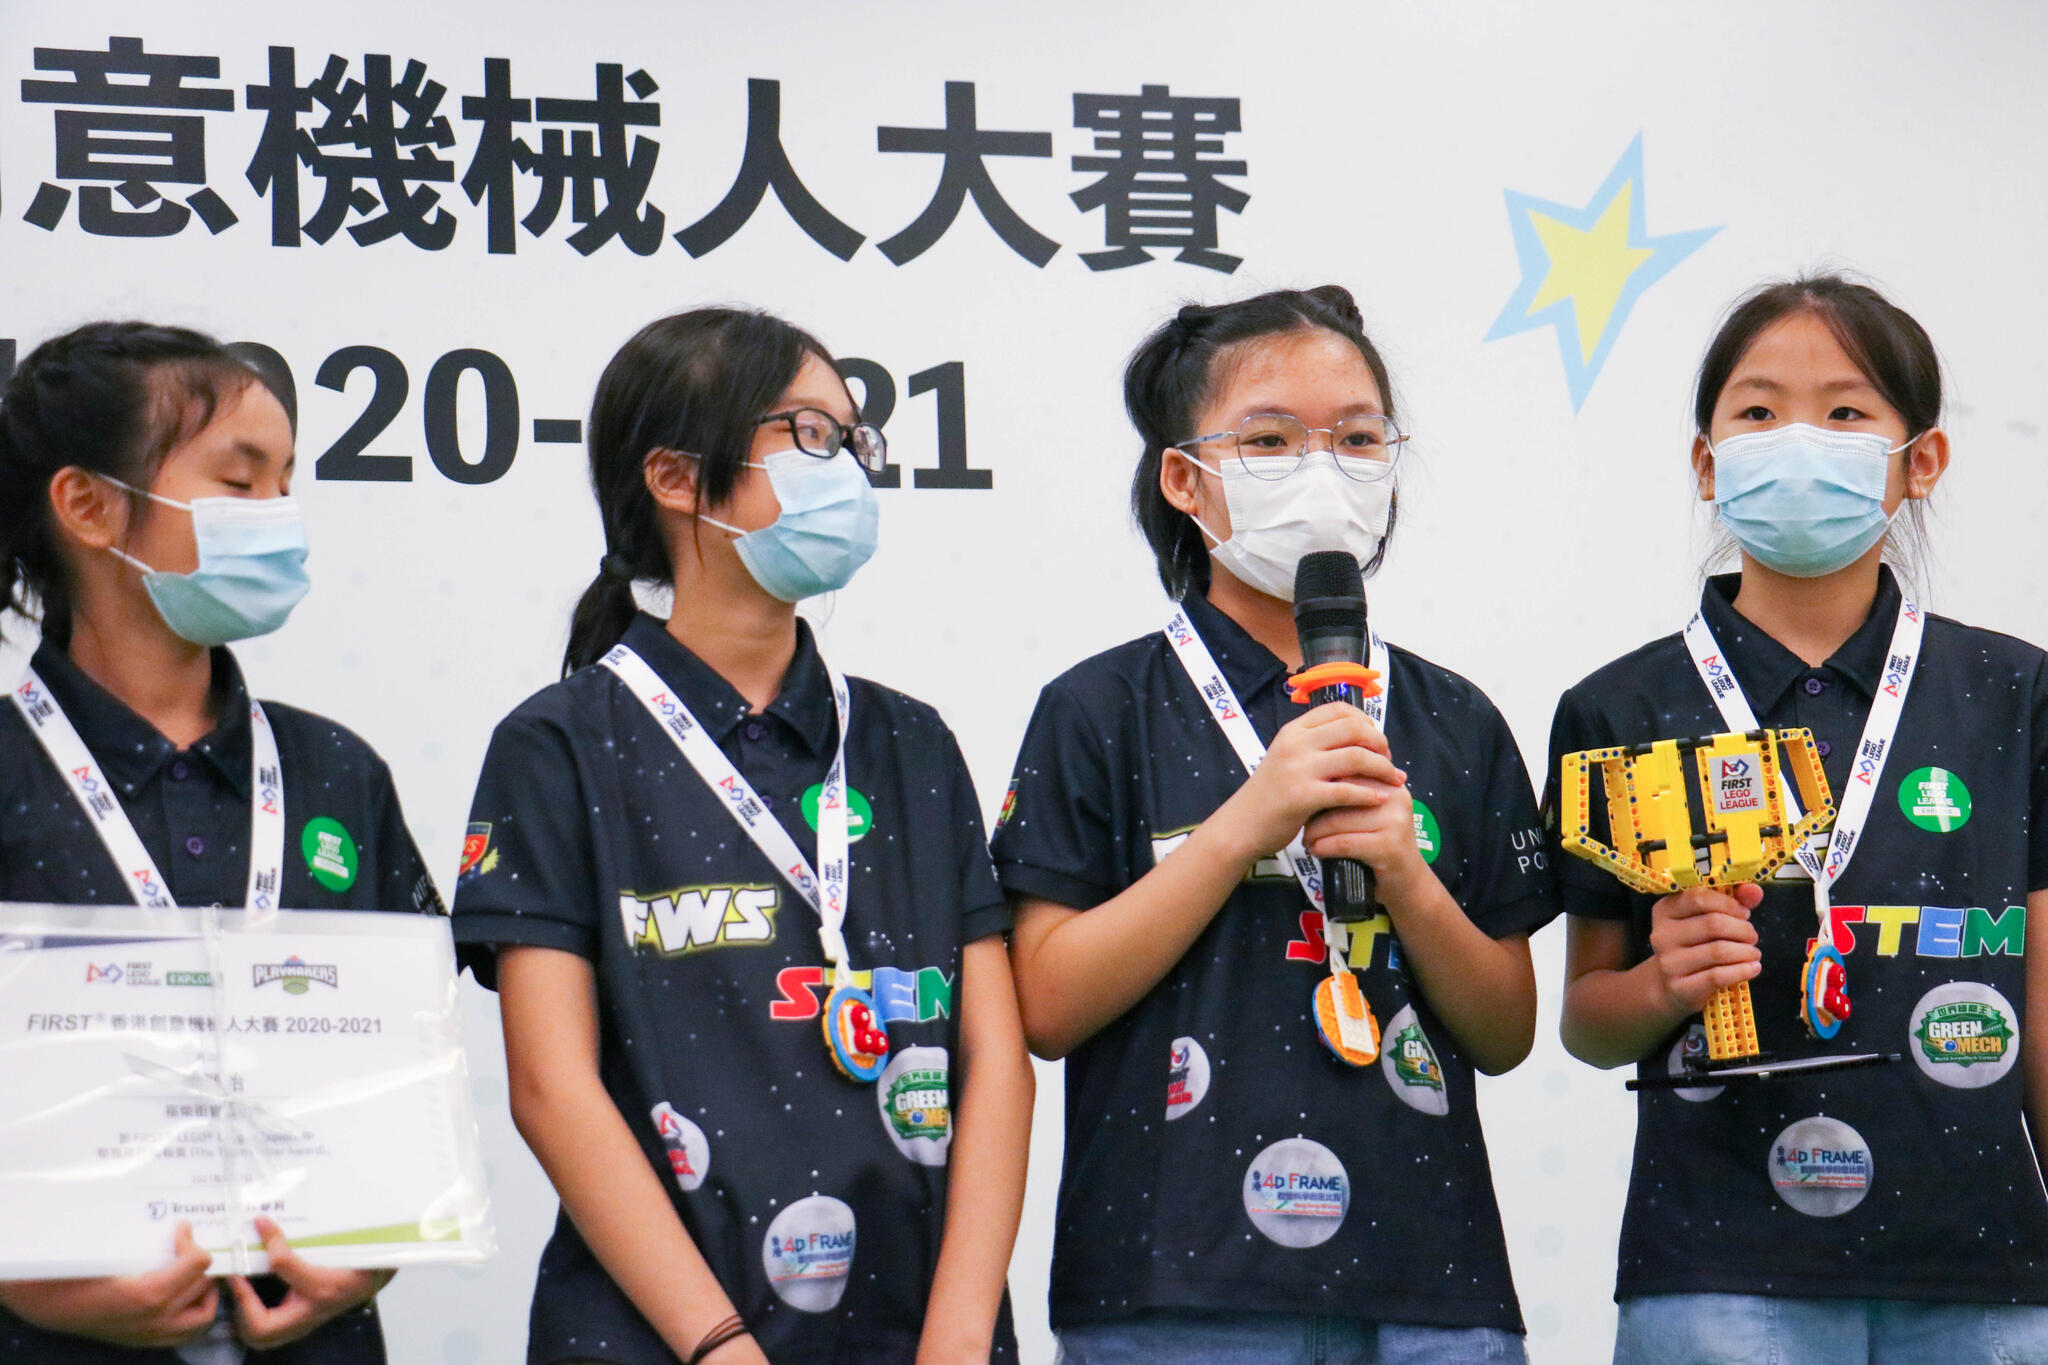 FIRST® LEGO® League 年度頒獎典禮 2020-21